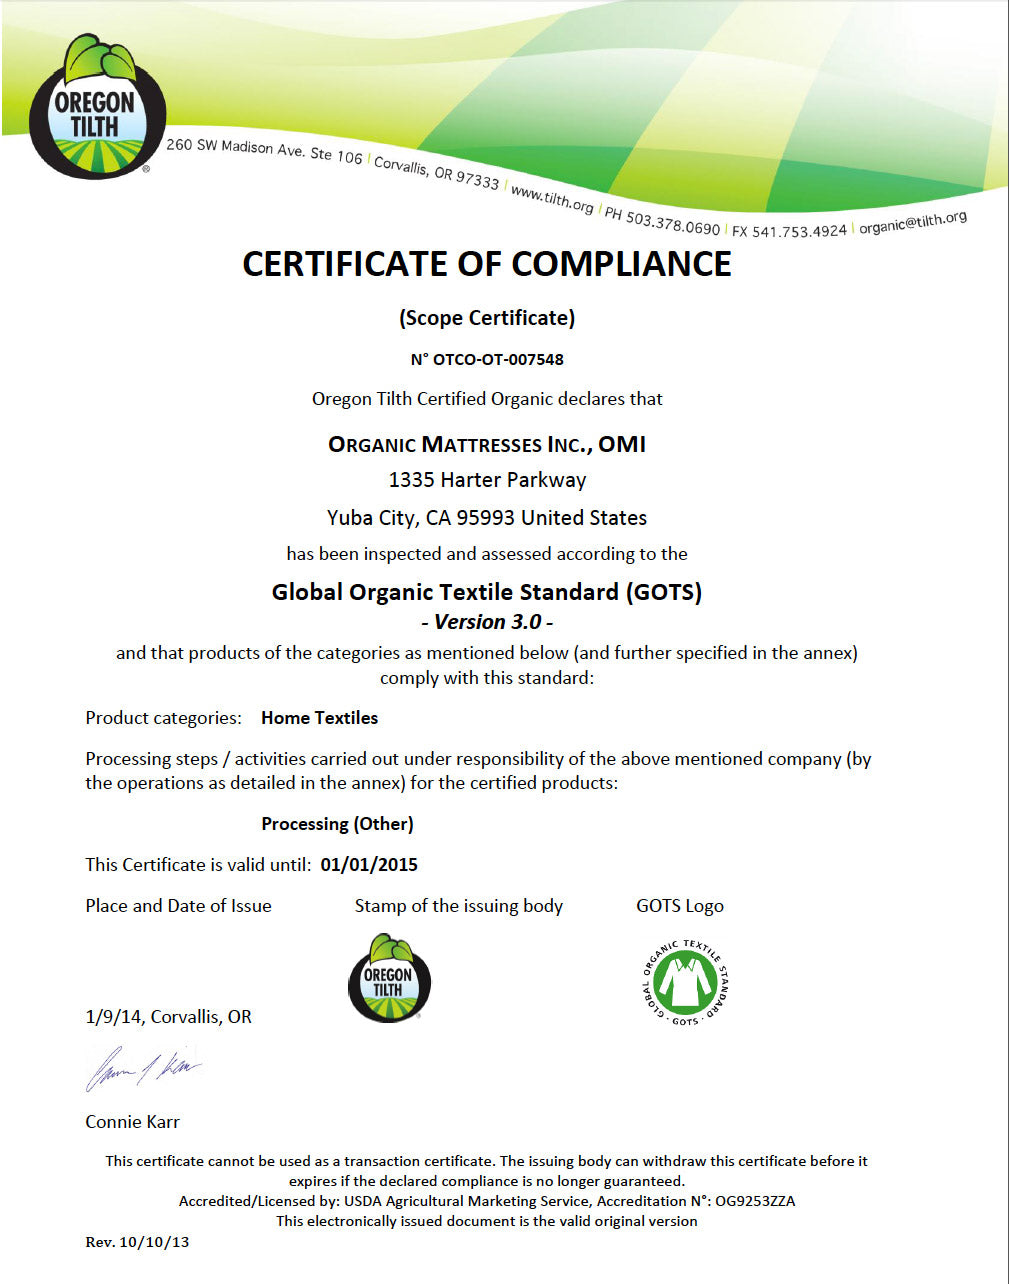 GOTS certificate - quality assurance of textiles made from organic